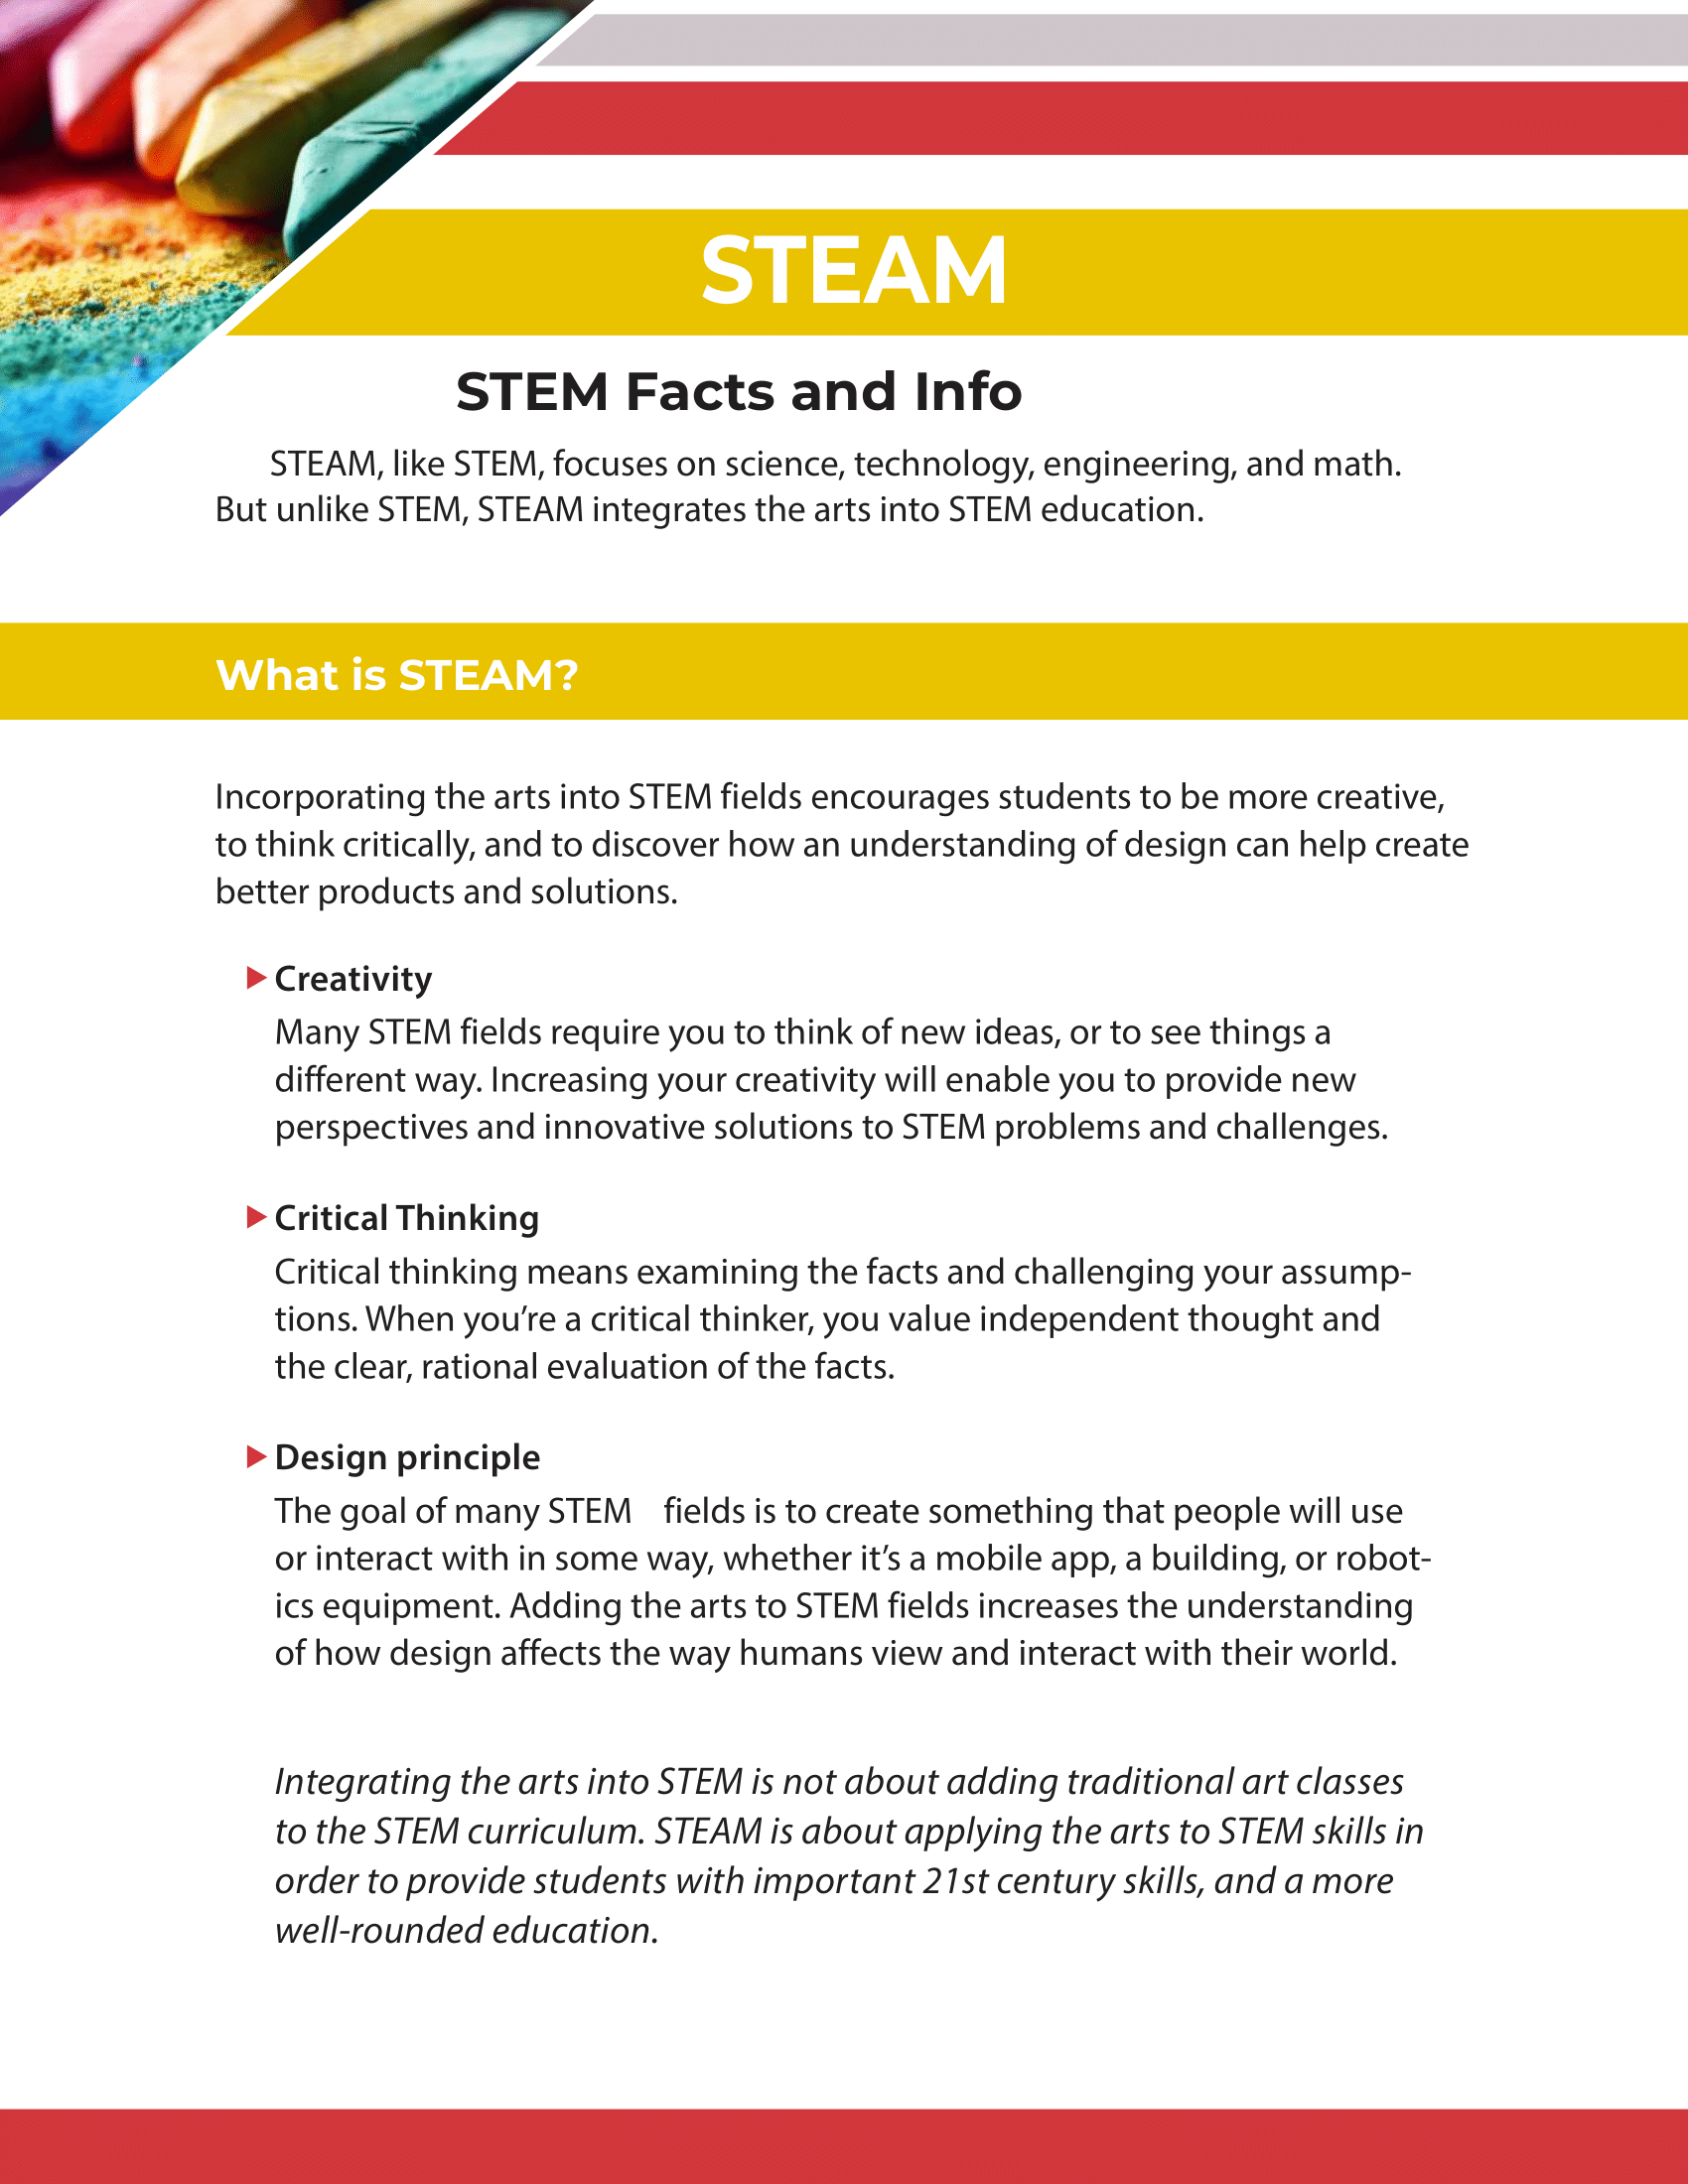 STEM Facts and Info - STEAM